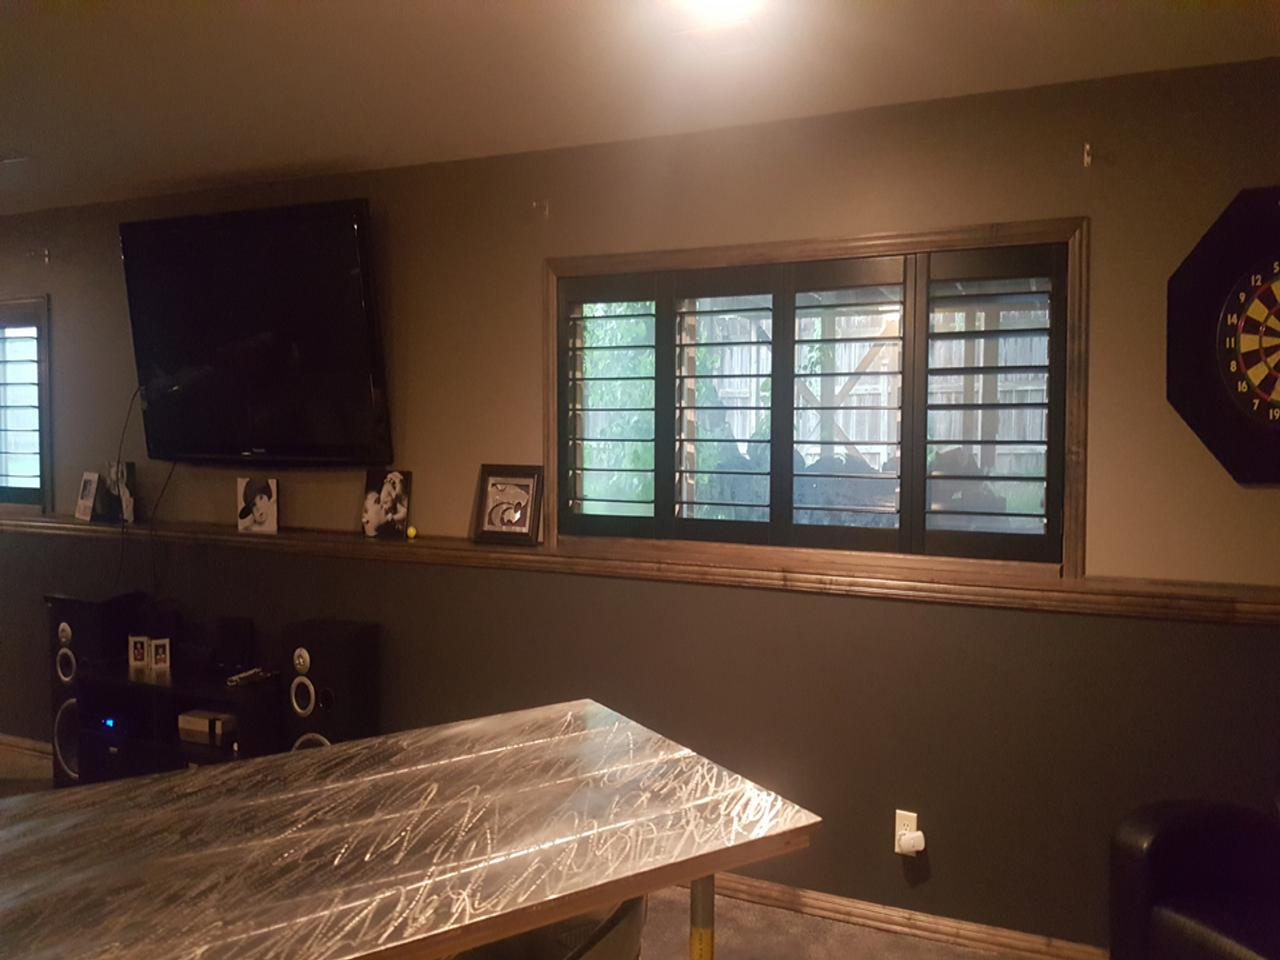 Rec room with stained plantation shutters